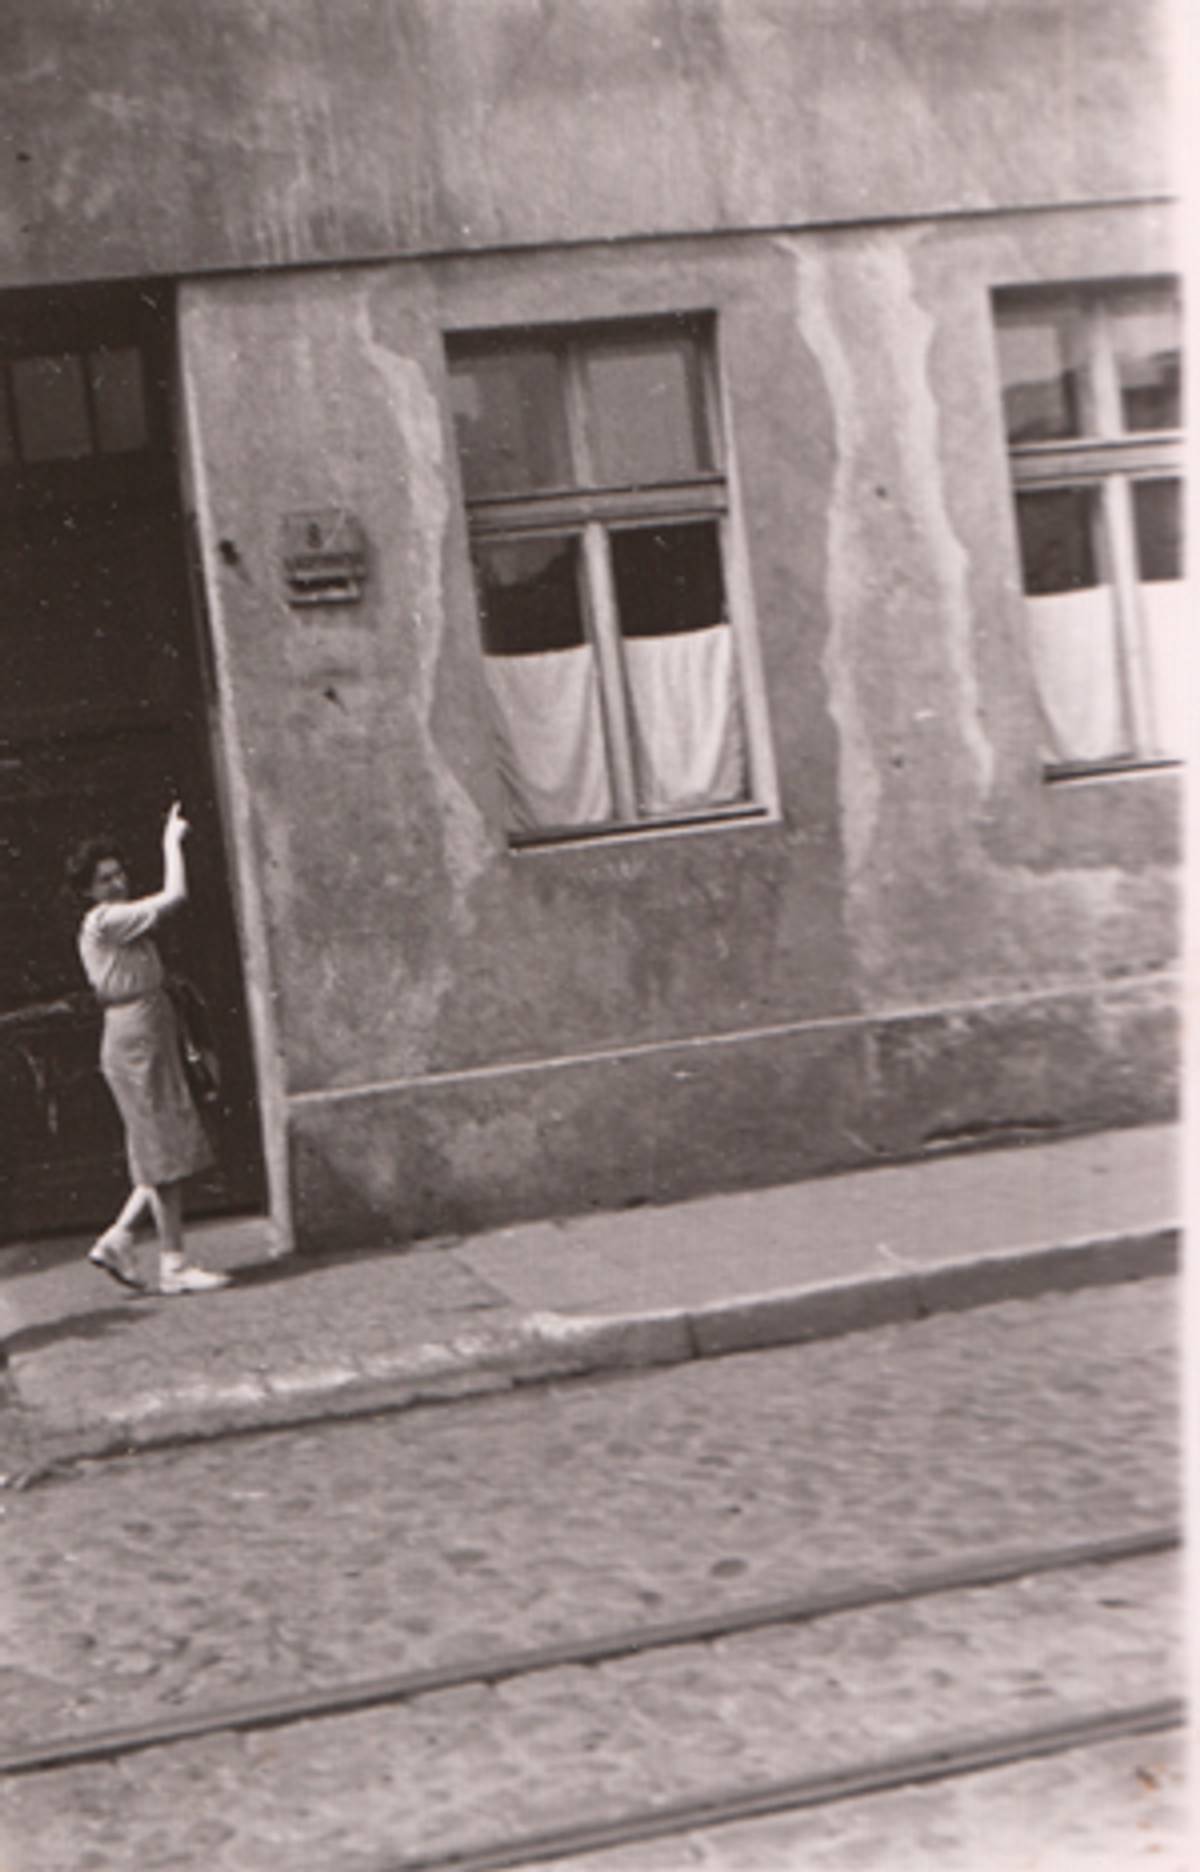 The author visiting Lodz, c. 1946, indicating the house in the ghetto where she lived.